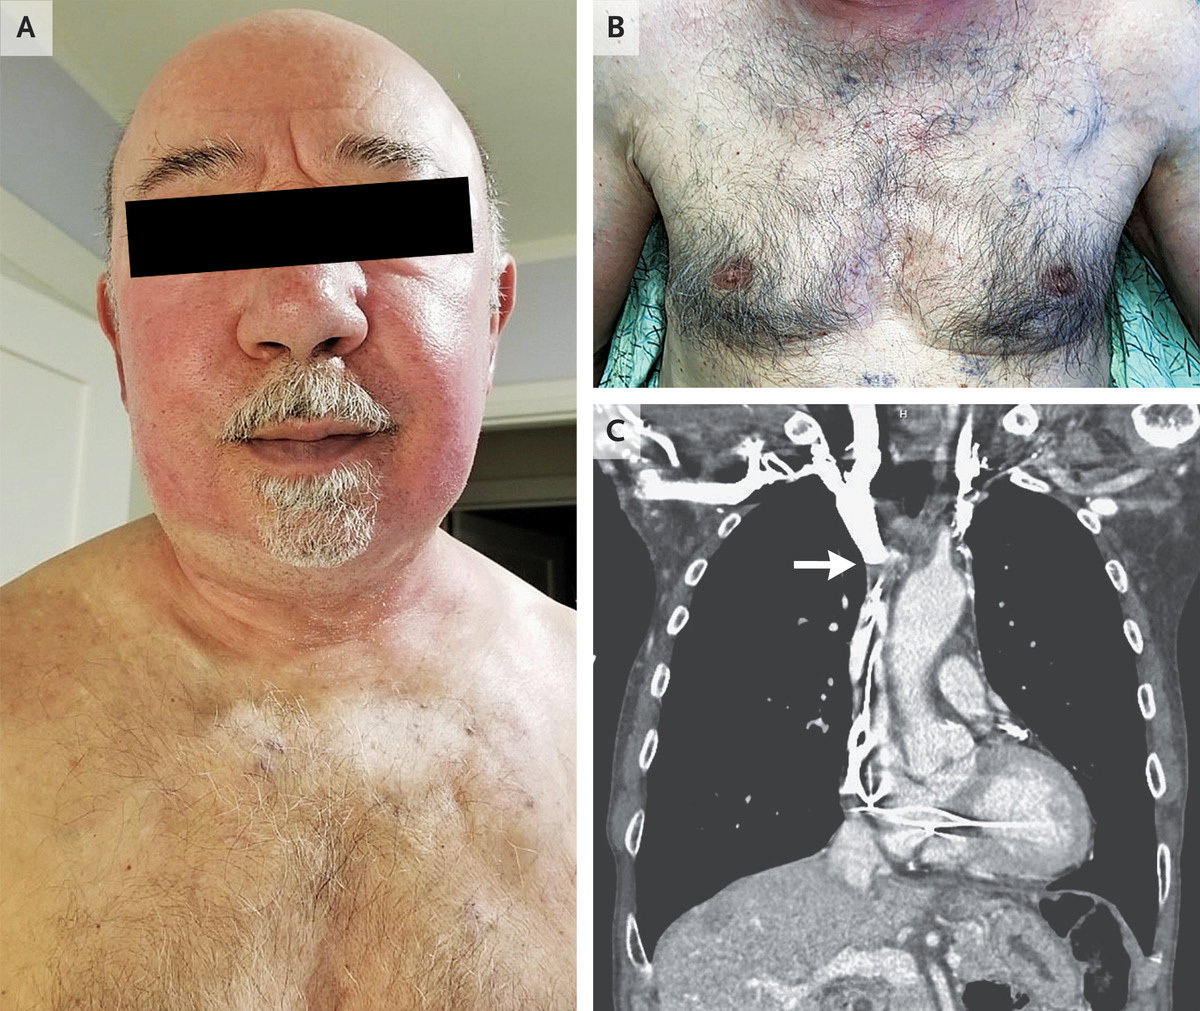 The man, aged 75, went to a dermatology clinic with erythema of the face, which doctors later found was linked to his pacemaker.